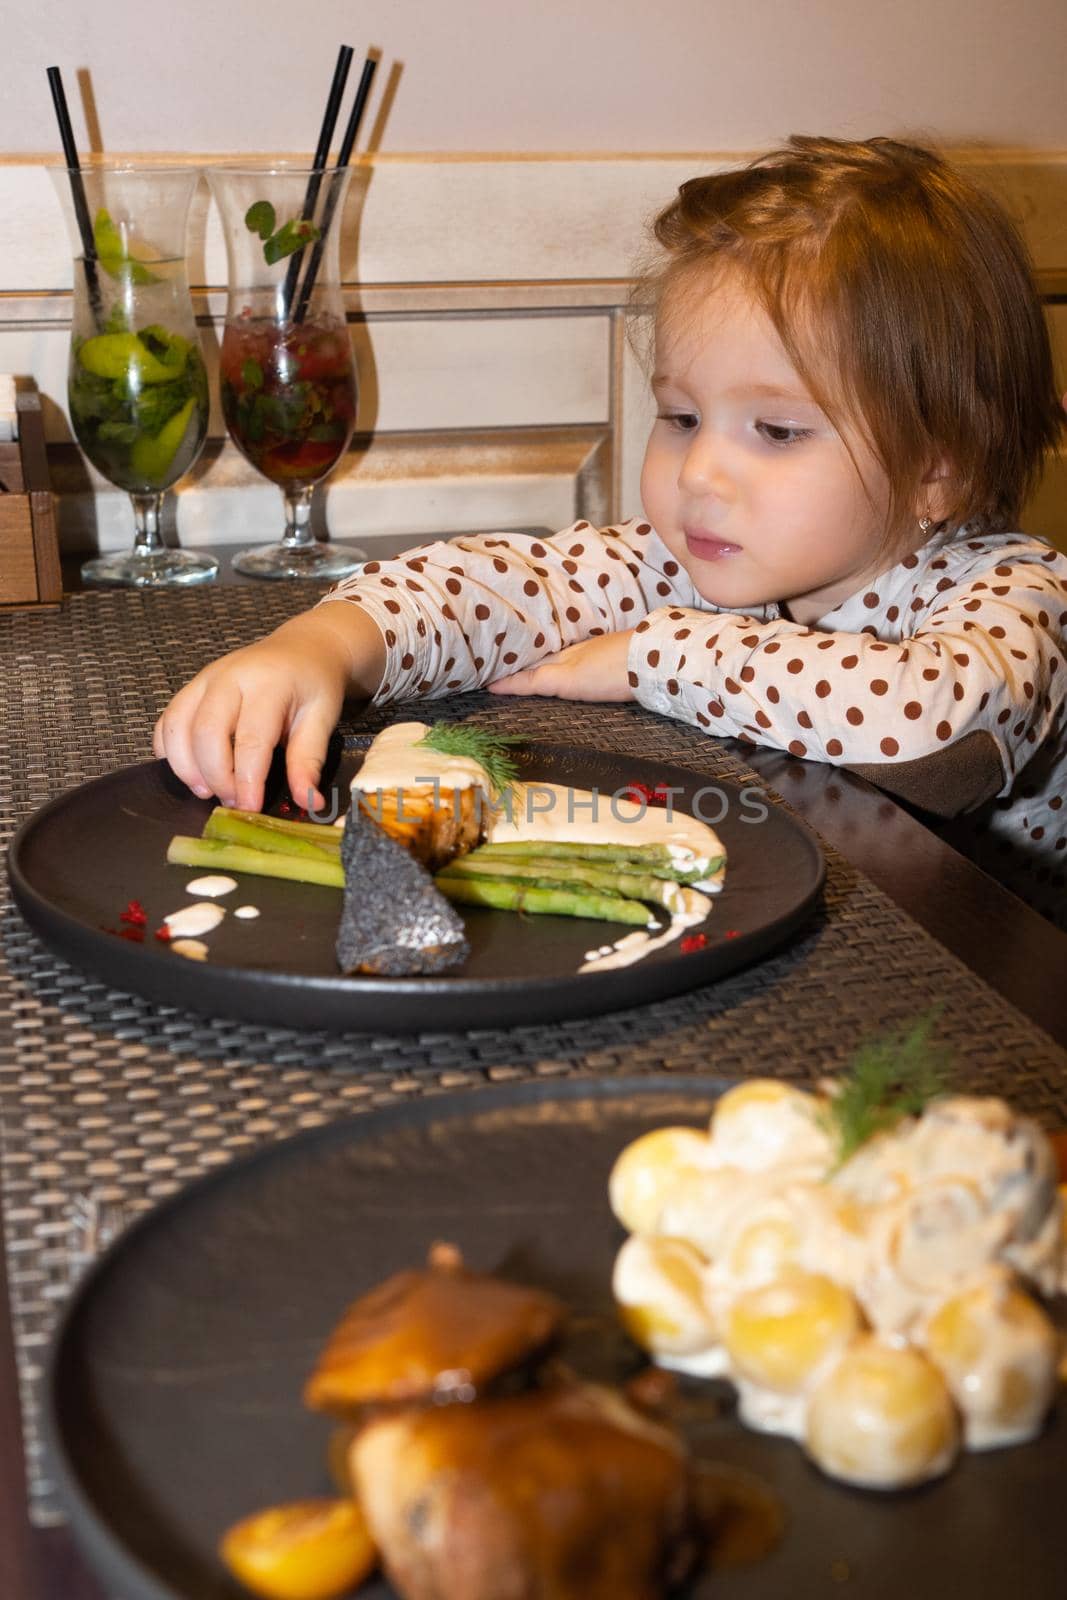 A little girl in a restaurant looks at a freshly brought fish dish on the table in front of her and wants to take some caviar from the plate with her hands to taste it. the dish looks very appetizing and the daughter could not resist and tries it right with her hands by olex